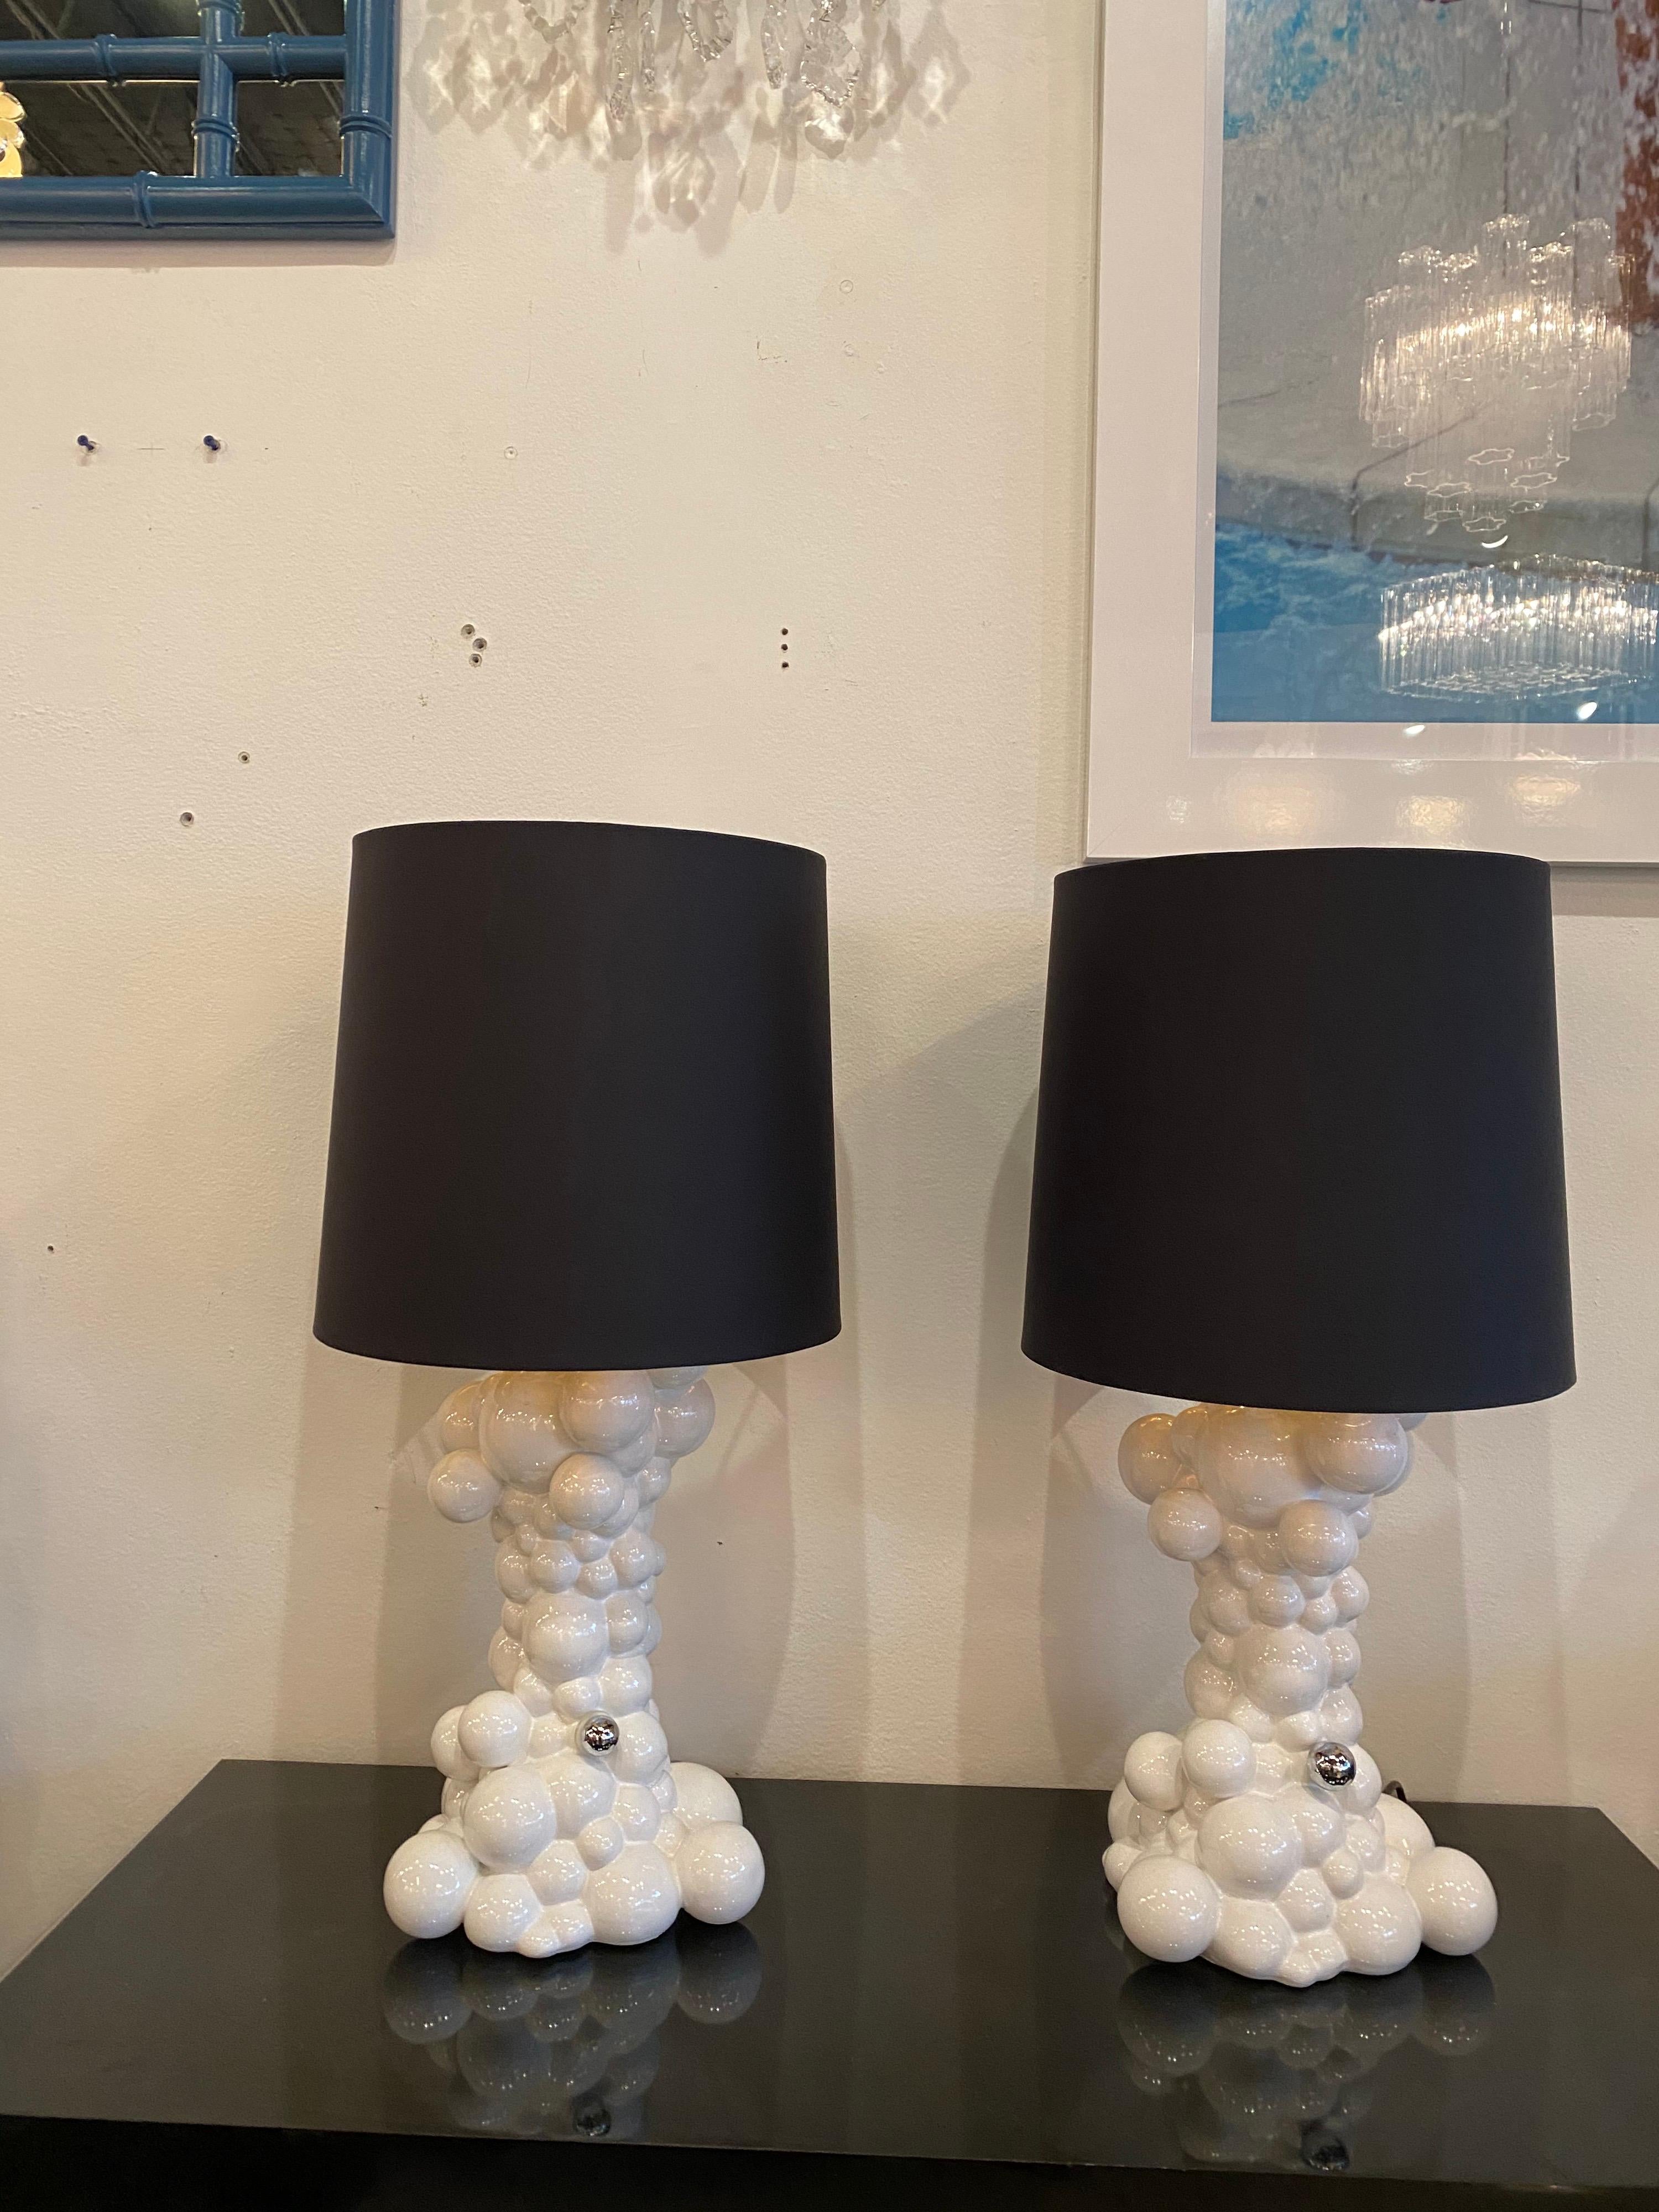 Pair of 21st century ceramic bubbles ball table lamps. The silver ball is a touch turn, 3 way.  No chips or breaks. Lamps measure 18